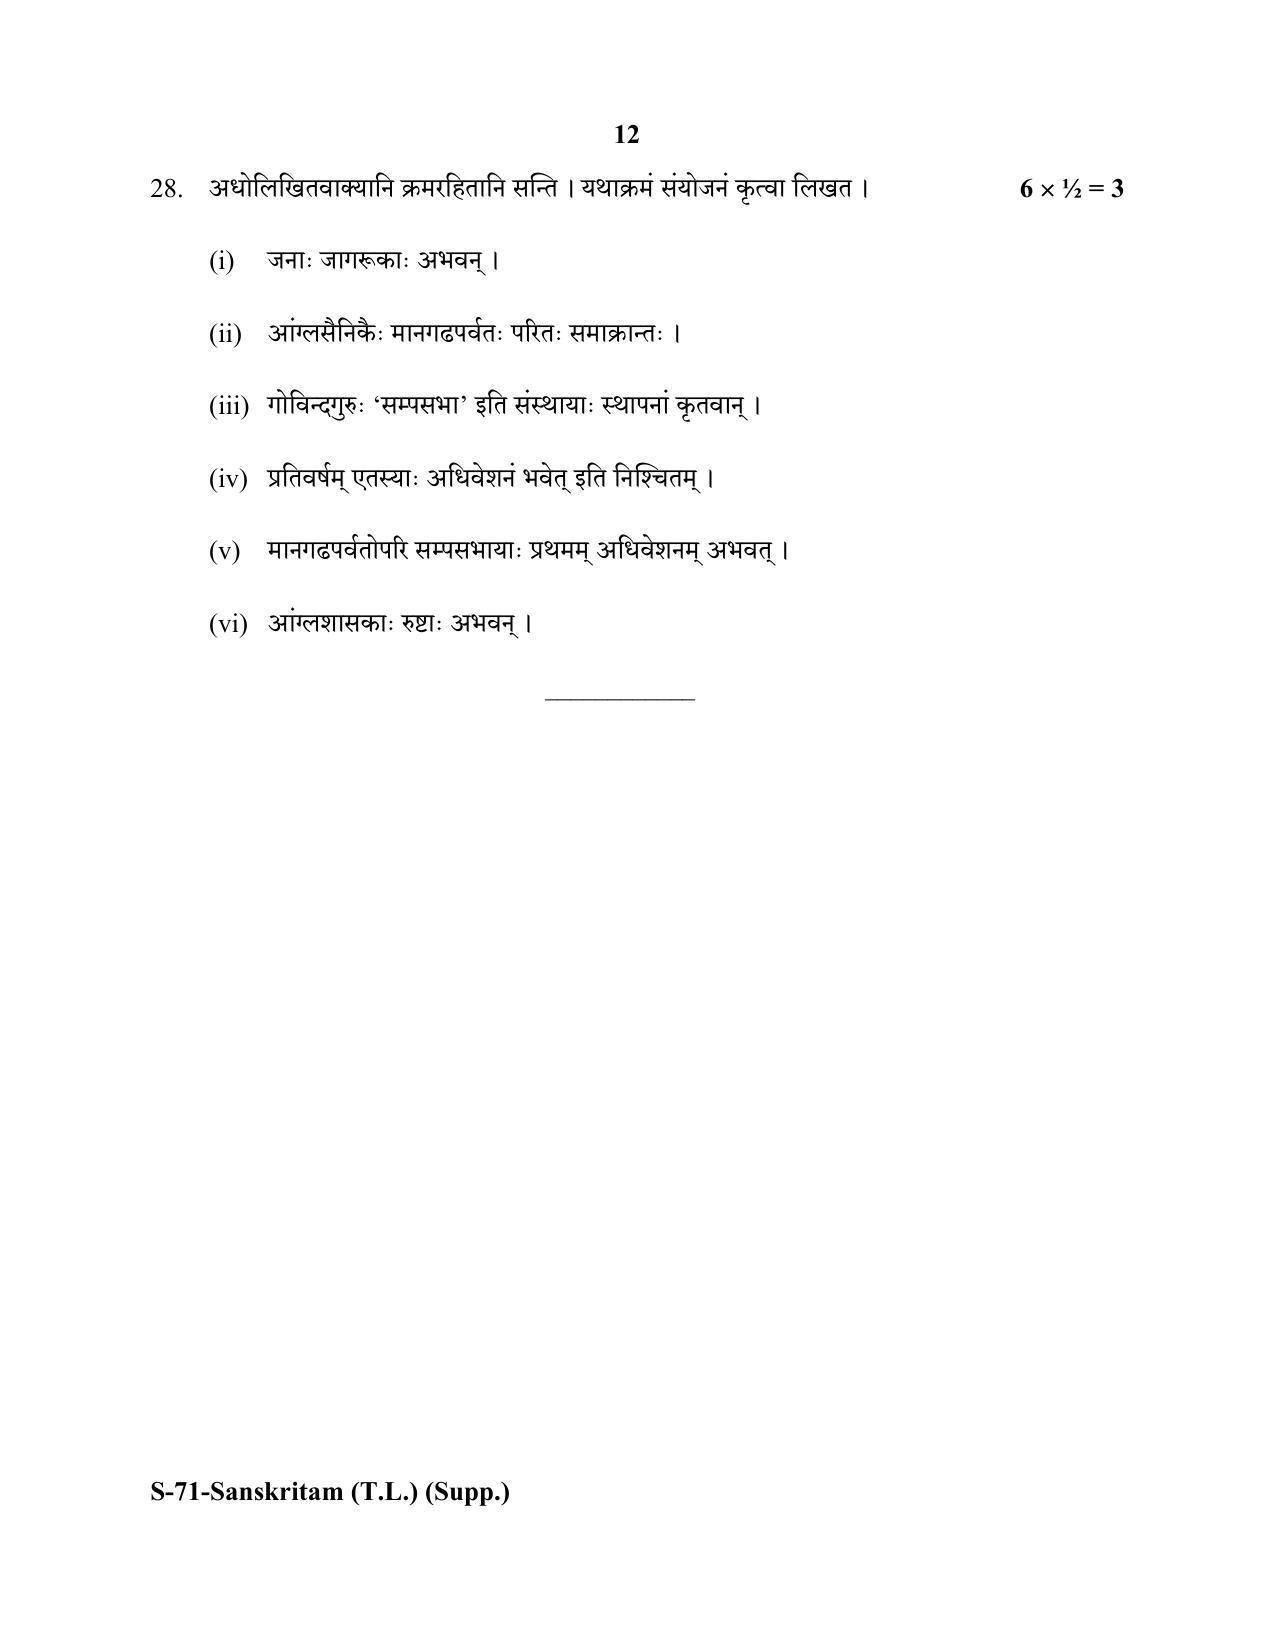 RBSE Class 10 Sanskrit TL Supplementary 2020 Question Paper - Page 12